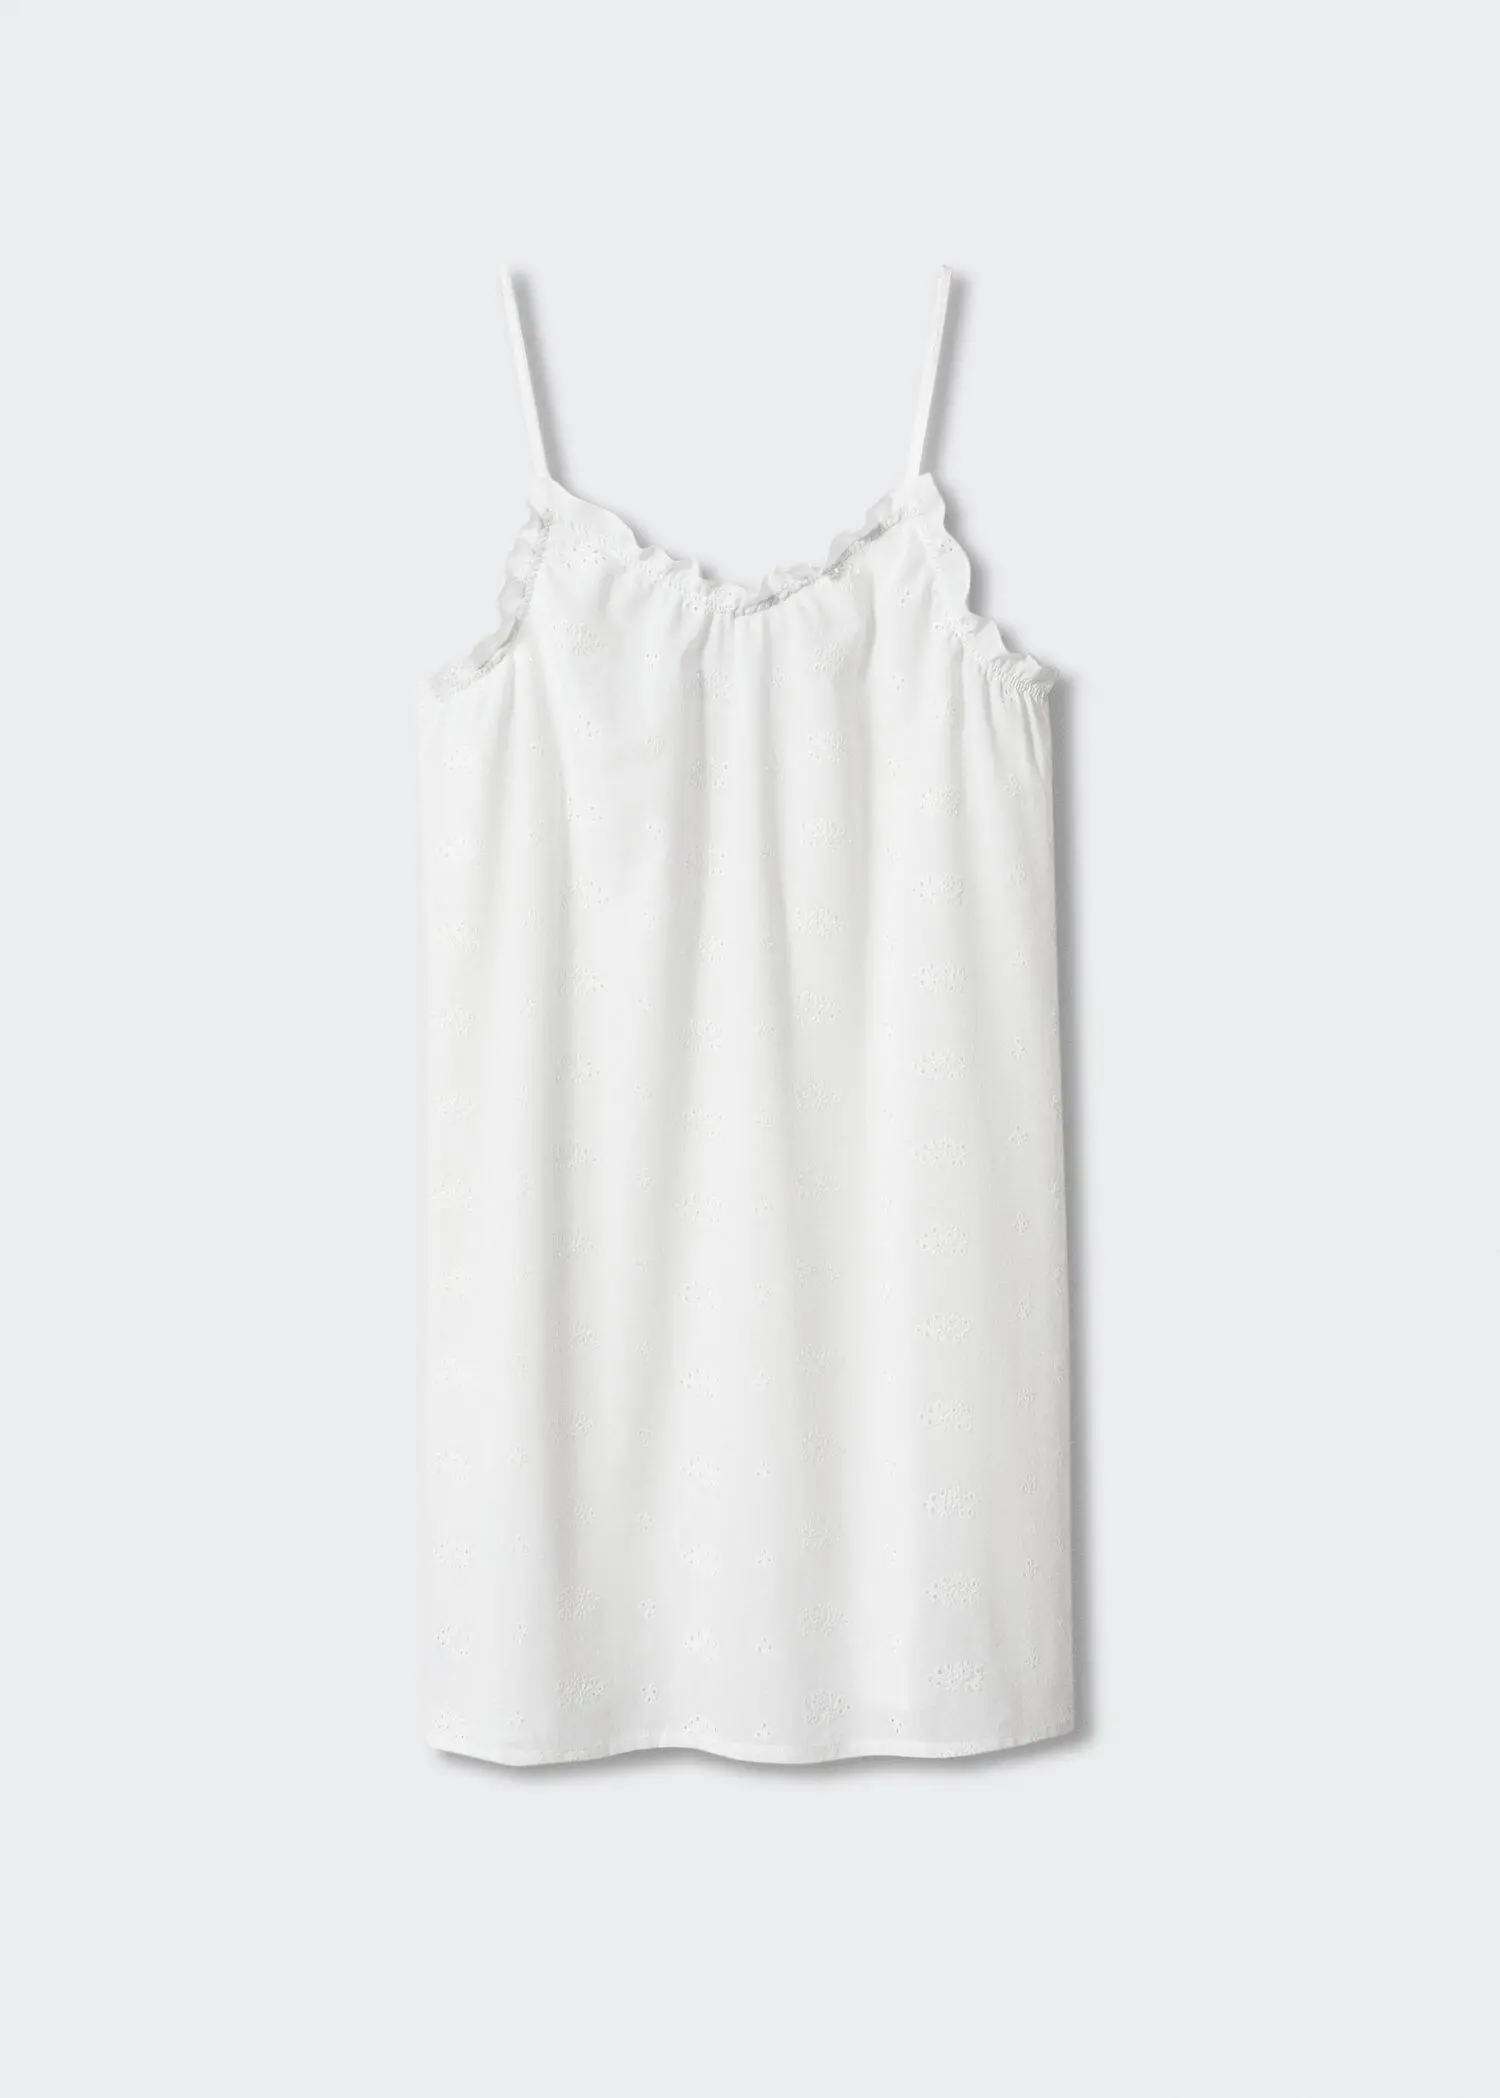 Mango Floral embroidered nightgown. a dress that is white and has spaghetti straps. 